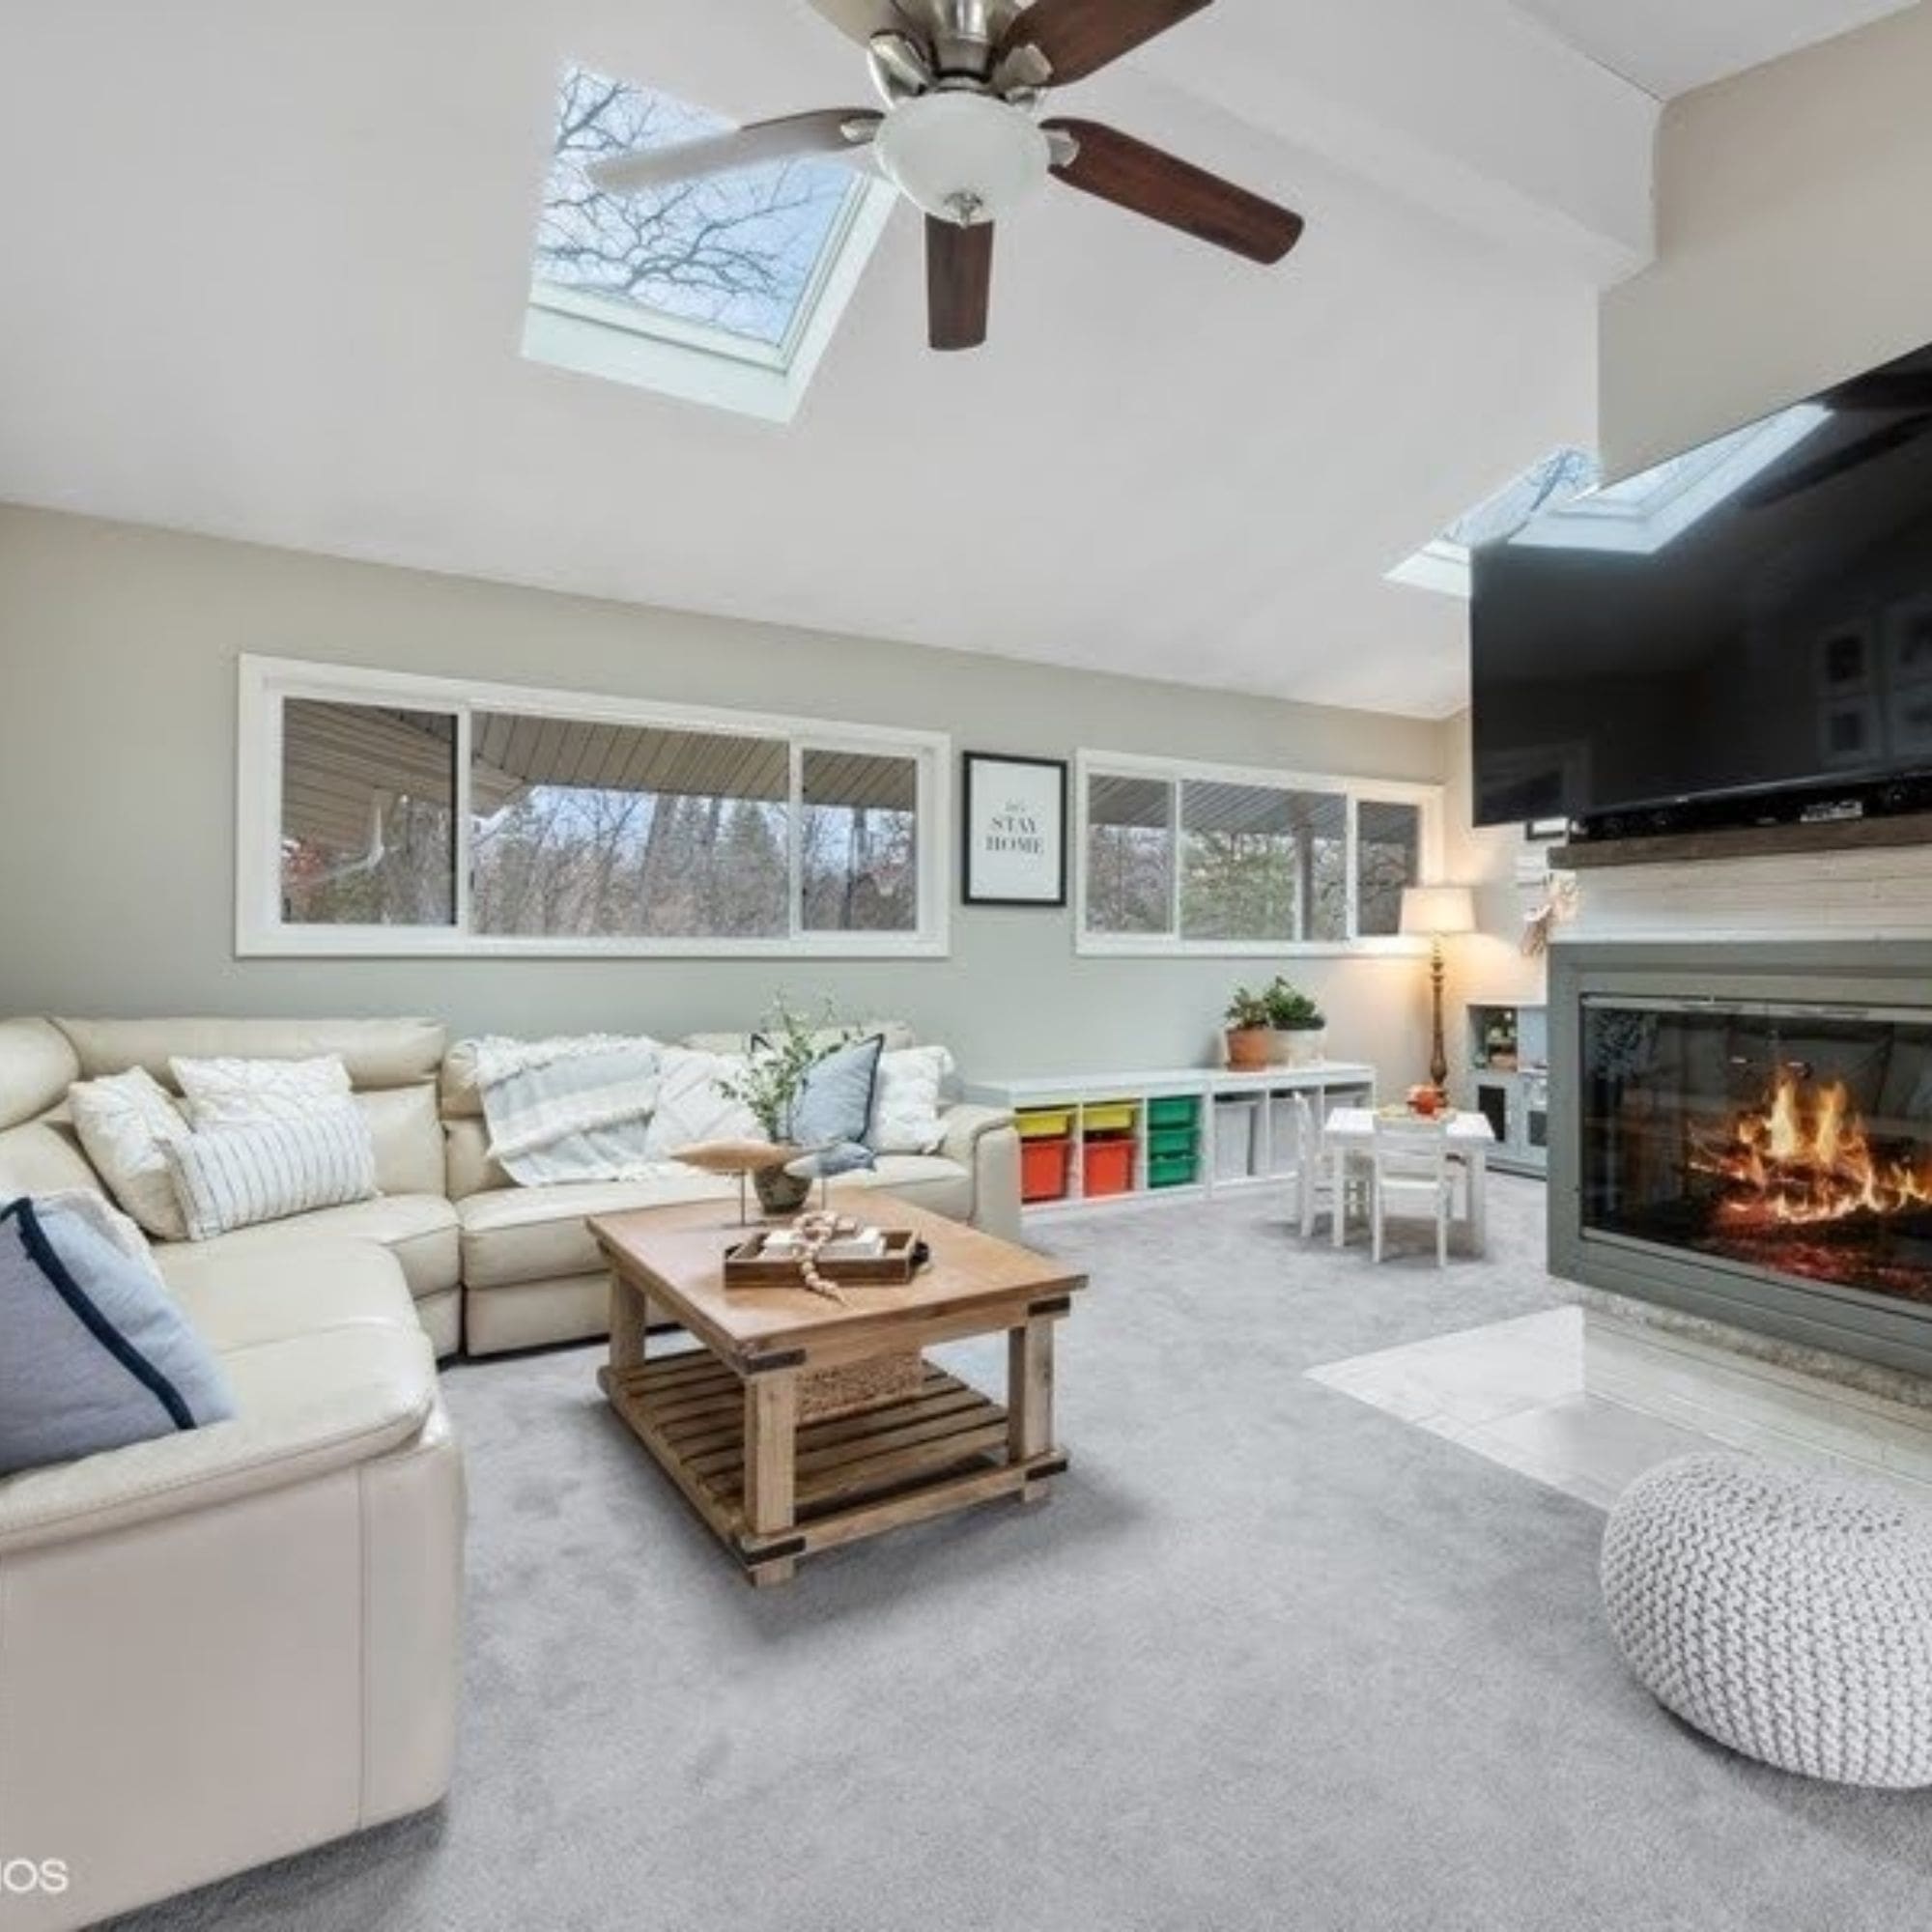 A well-equipped home staged living room with a fireplace, TV, and ceiling fan.